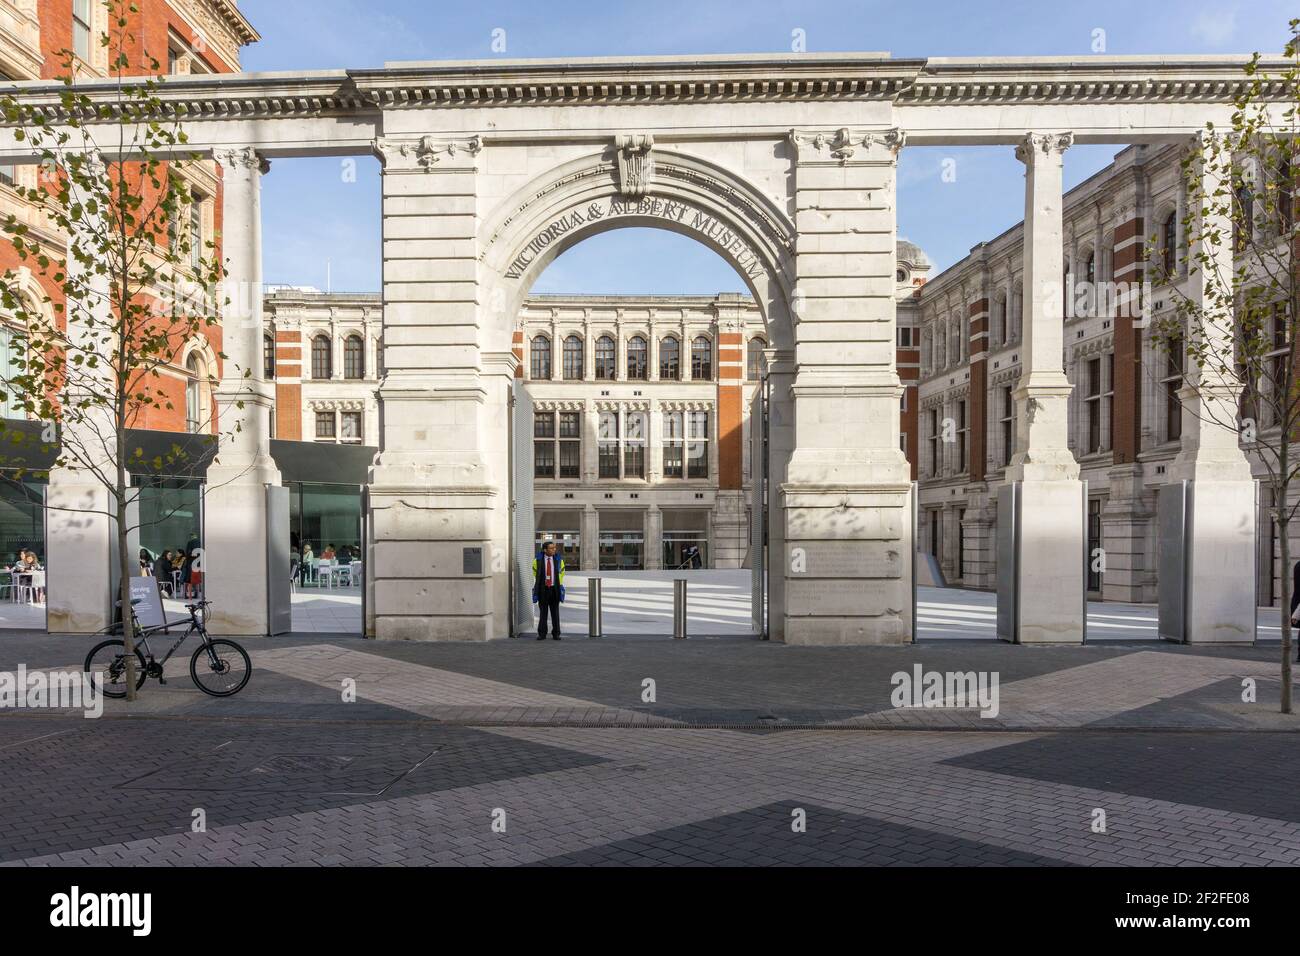 Entrance to the Victoria & Albert Museum off Exhibition Road via the Sackler courtyard, London, UK Stock Photo